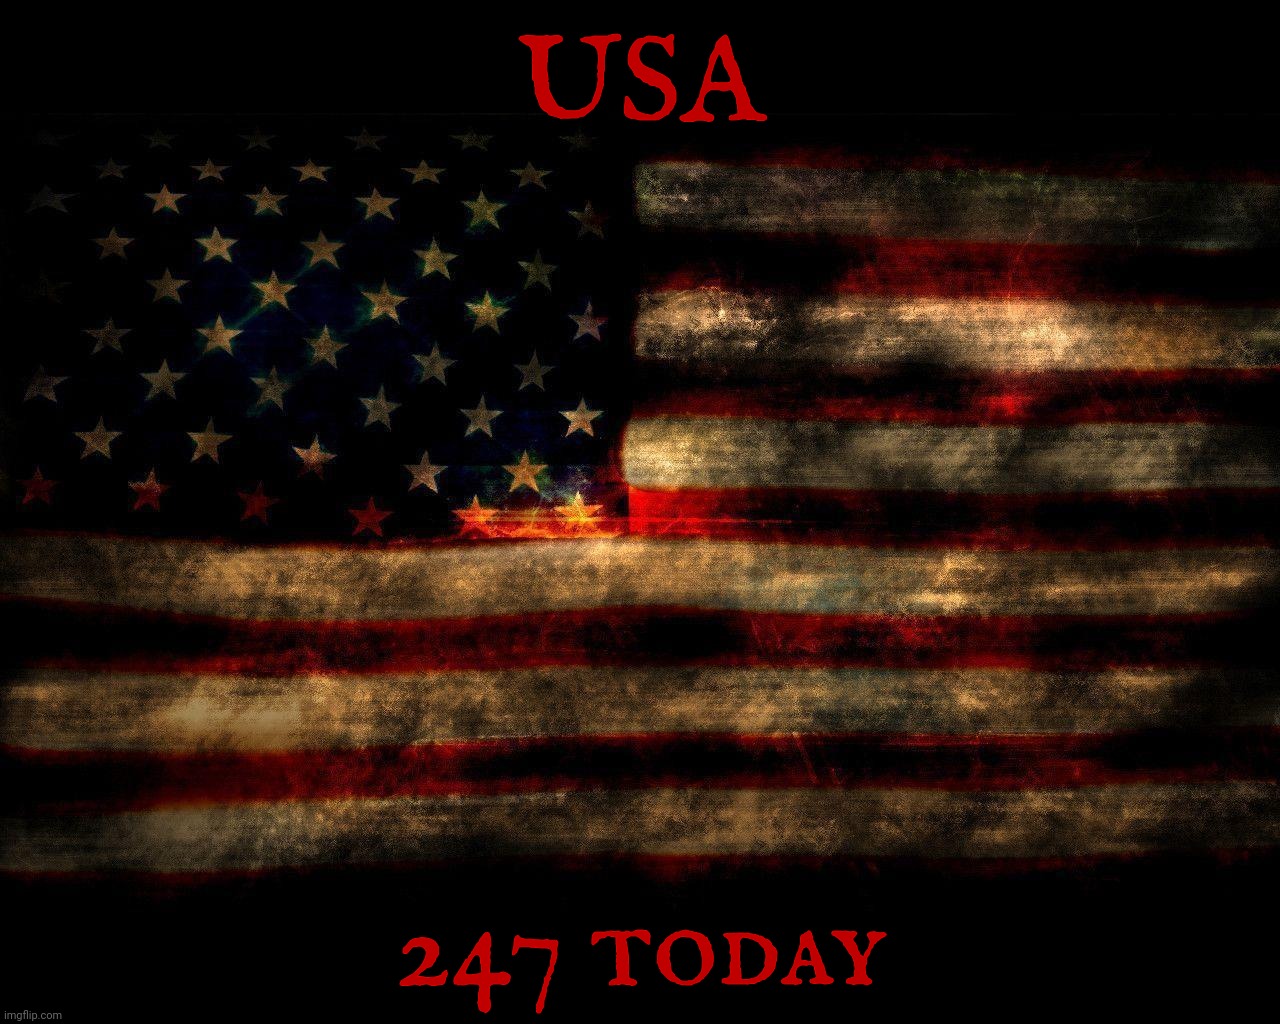 USA Flag Lg 1280 x 1024 | USA 247 today | image tagged in usa flag lg 1280 x 1024 | made w/ Imgflip meme maker